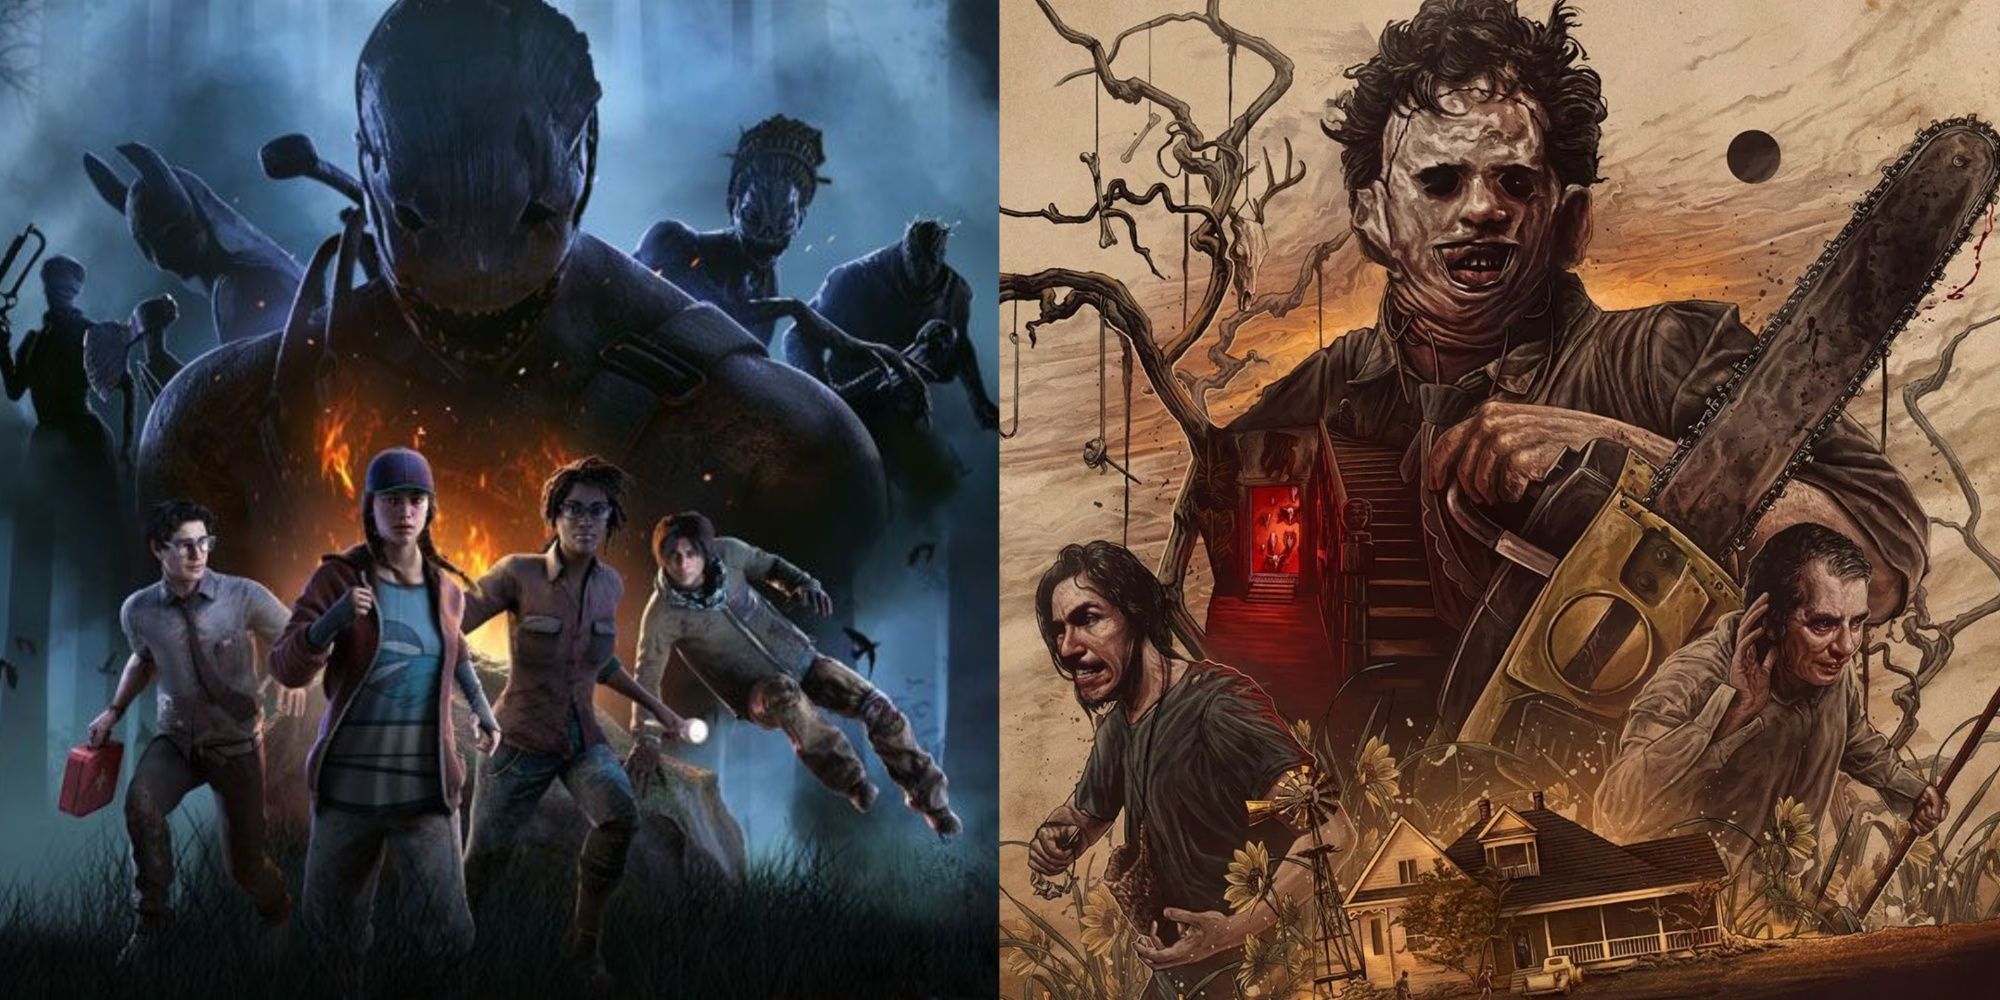 Dead By Daylight cover art and The Texas Chain Saw Massacre promotional art